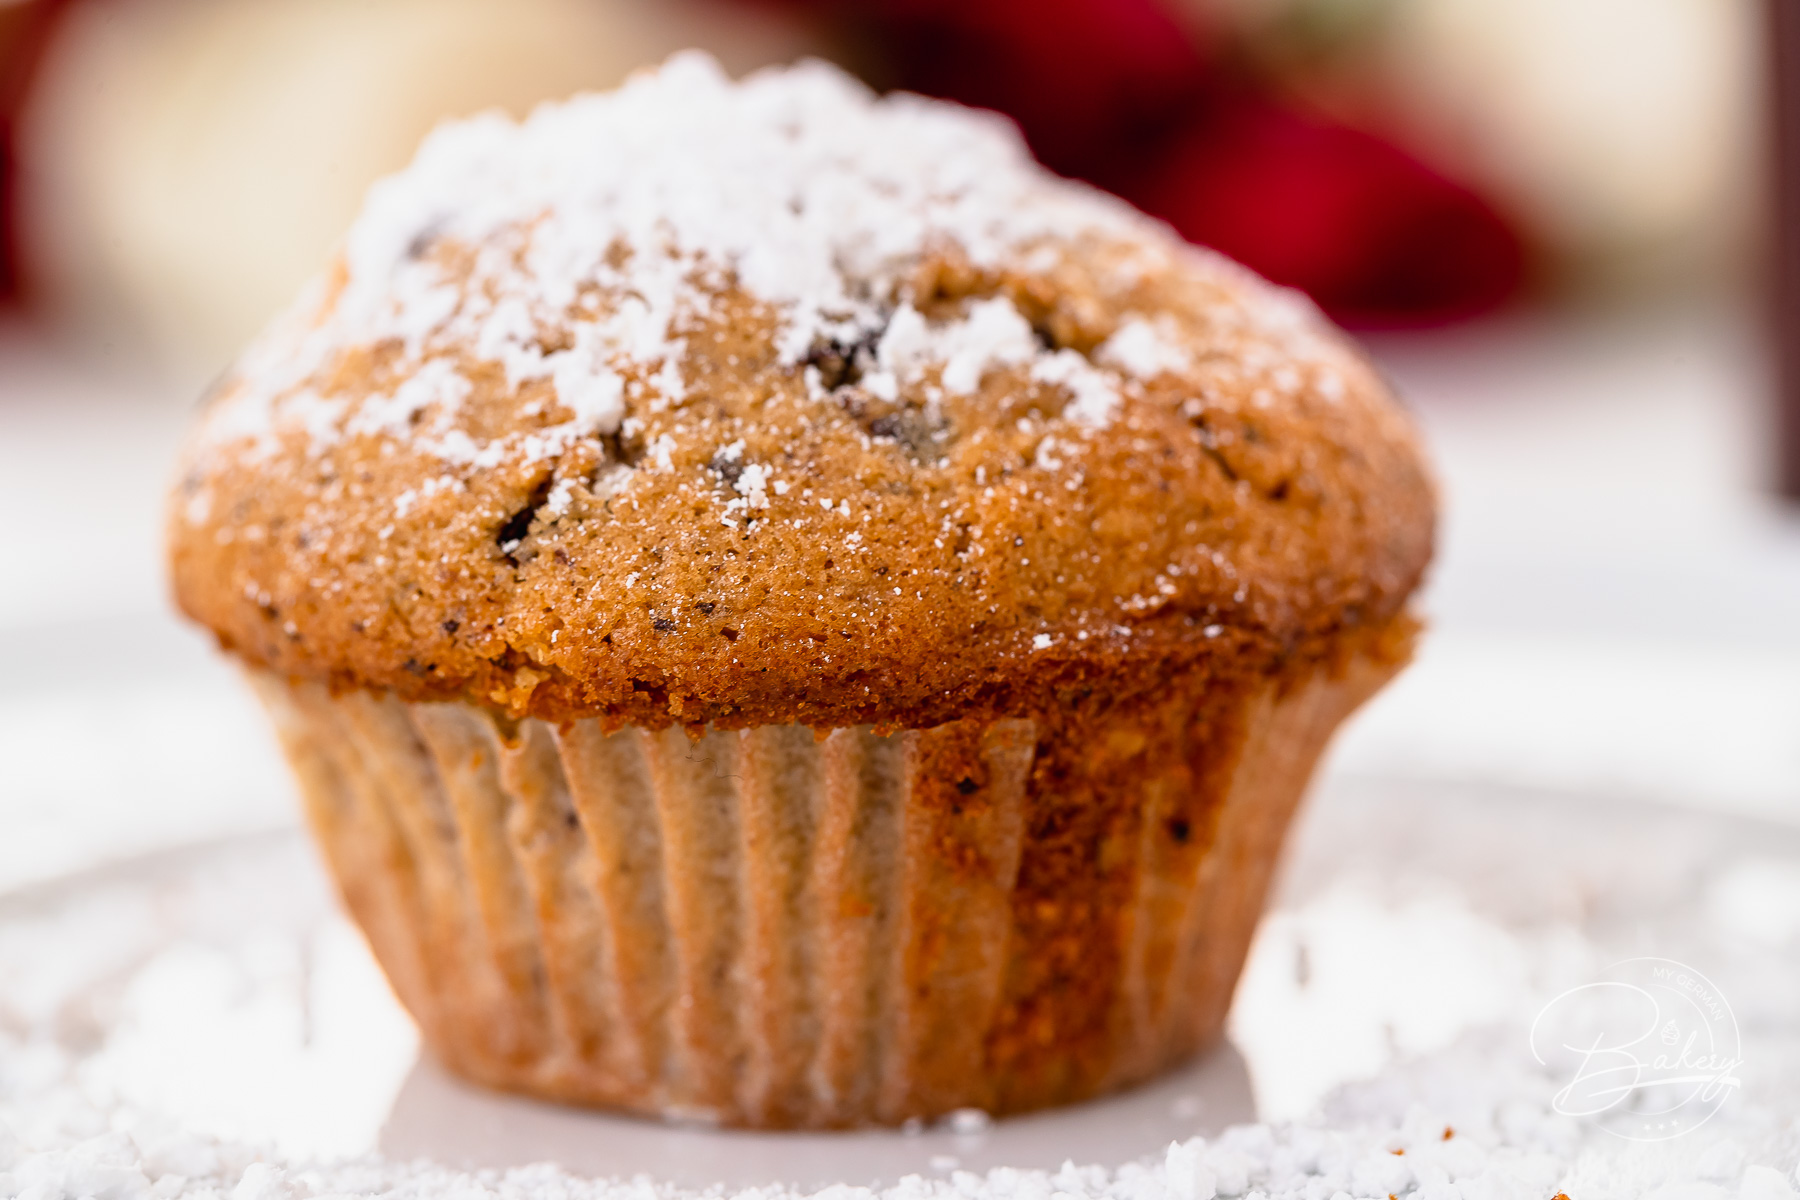 Espresso muffins recipe - coffee muffins baking instructions - muffins with chocolate, nuts, fruits - quick made muffins - easy baking recipe for kids and adults - Mini cake recipe for delicious coffee muffins. Muffins and cupcakes with coffee flavor, dark chocolate, nuts.